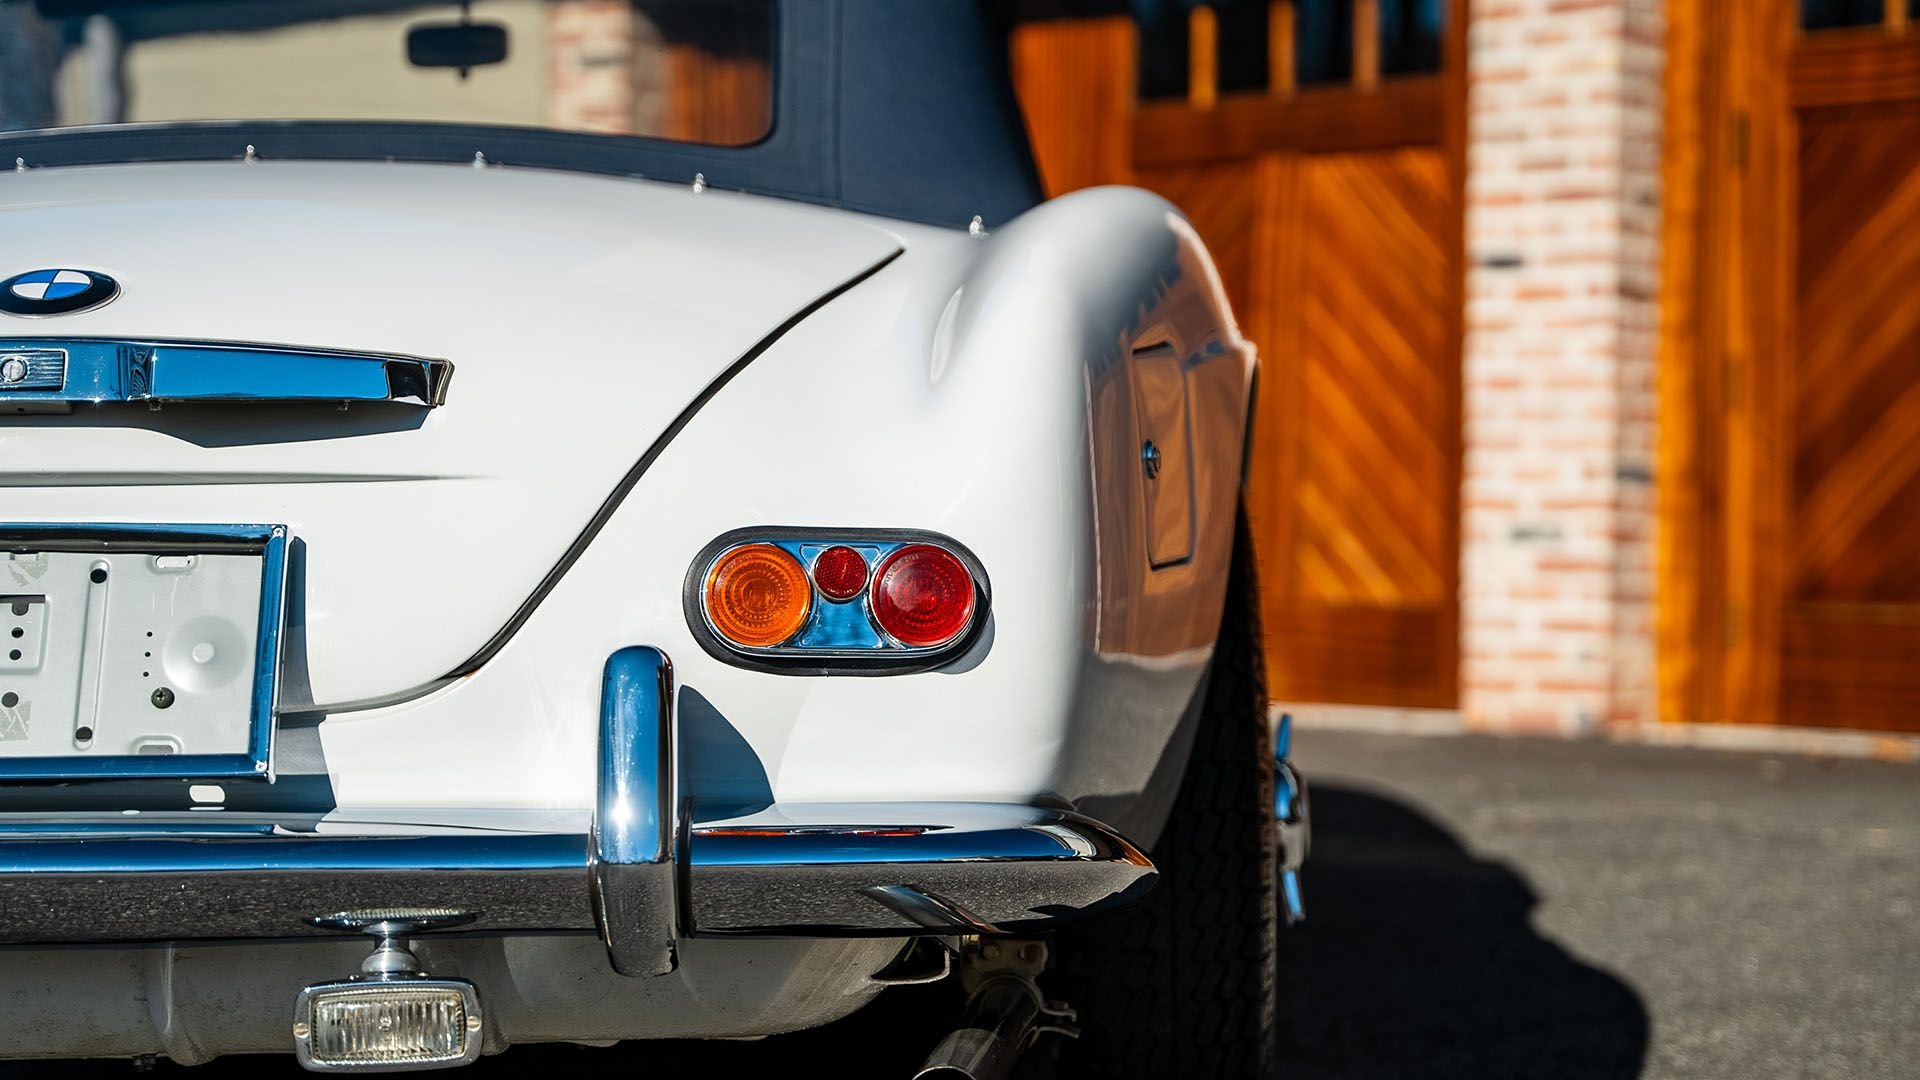 For Sale 1958 BMW 507 Series II Roadster